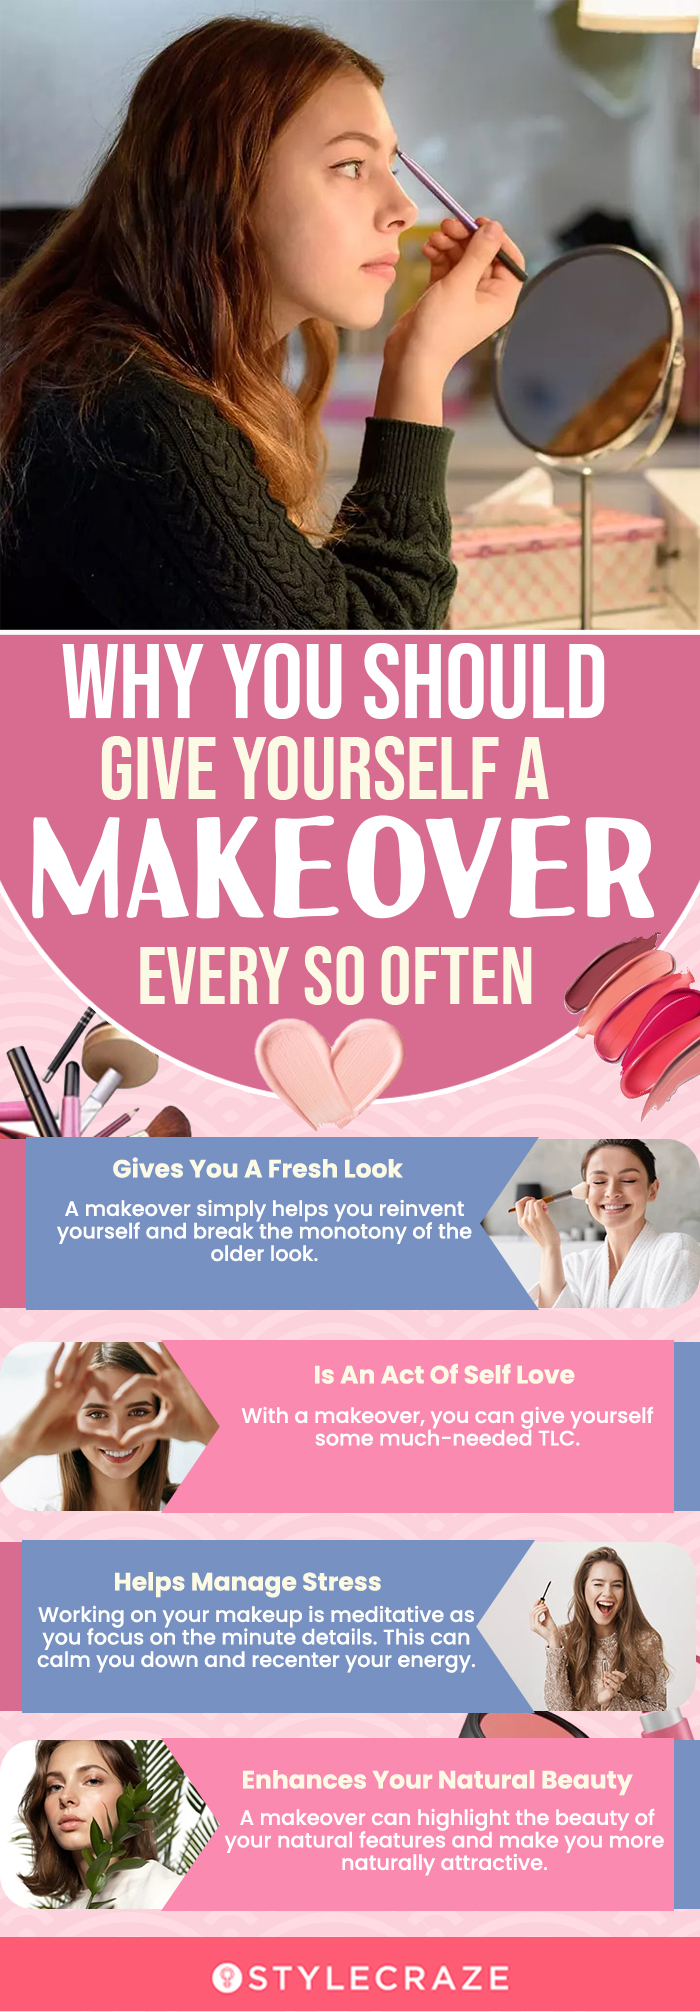 why you should give yourself a makeover every so often (infographic)